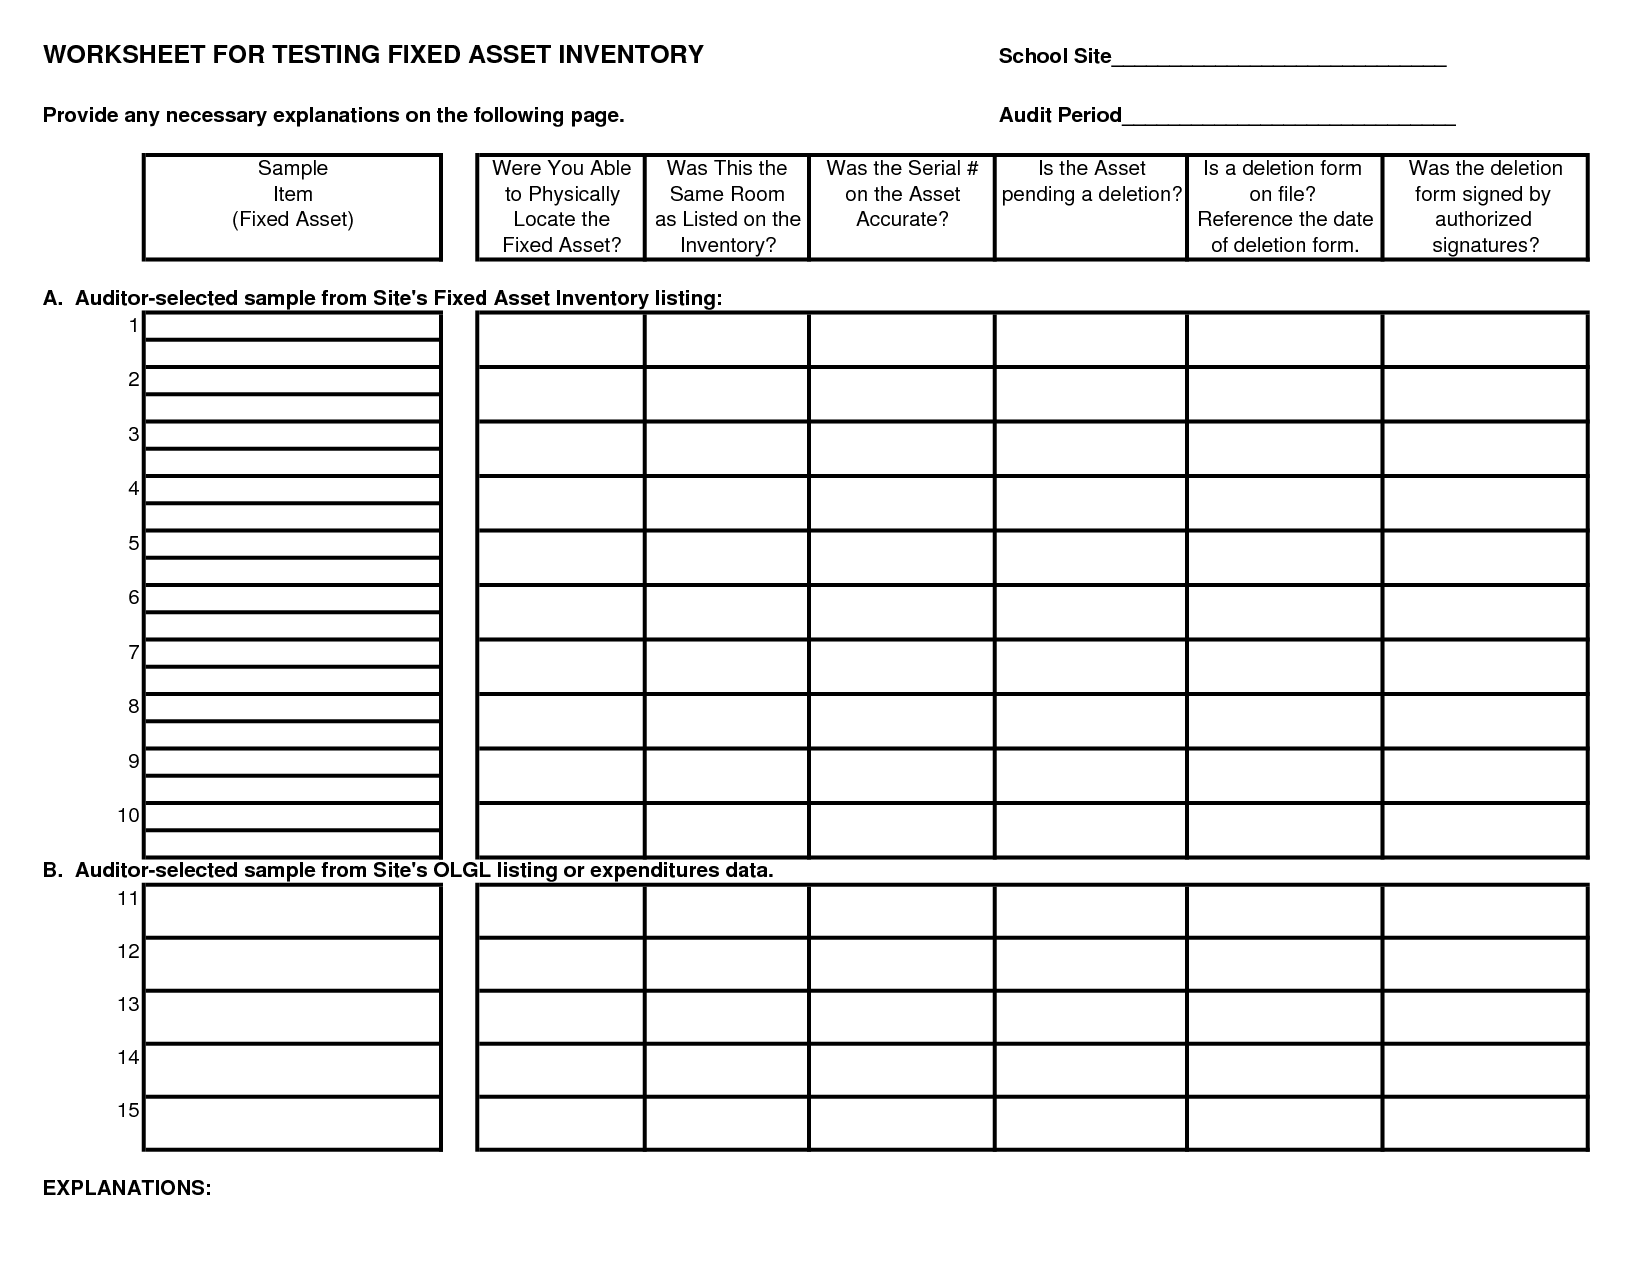 Download Step 4 Worksheets Aa 4th Step Inventory Guide Step 4 | Gantt